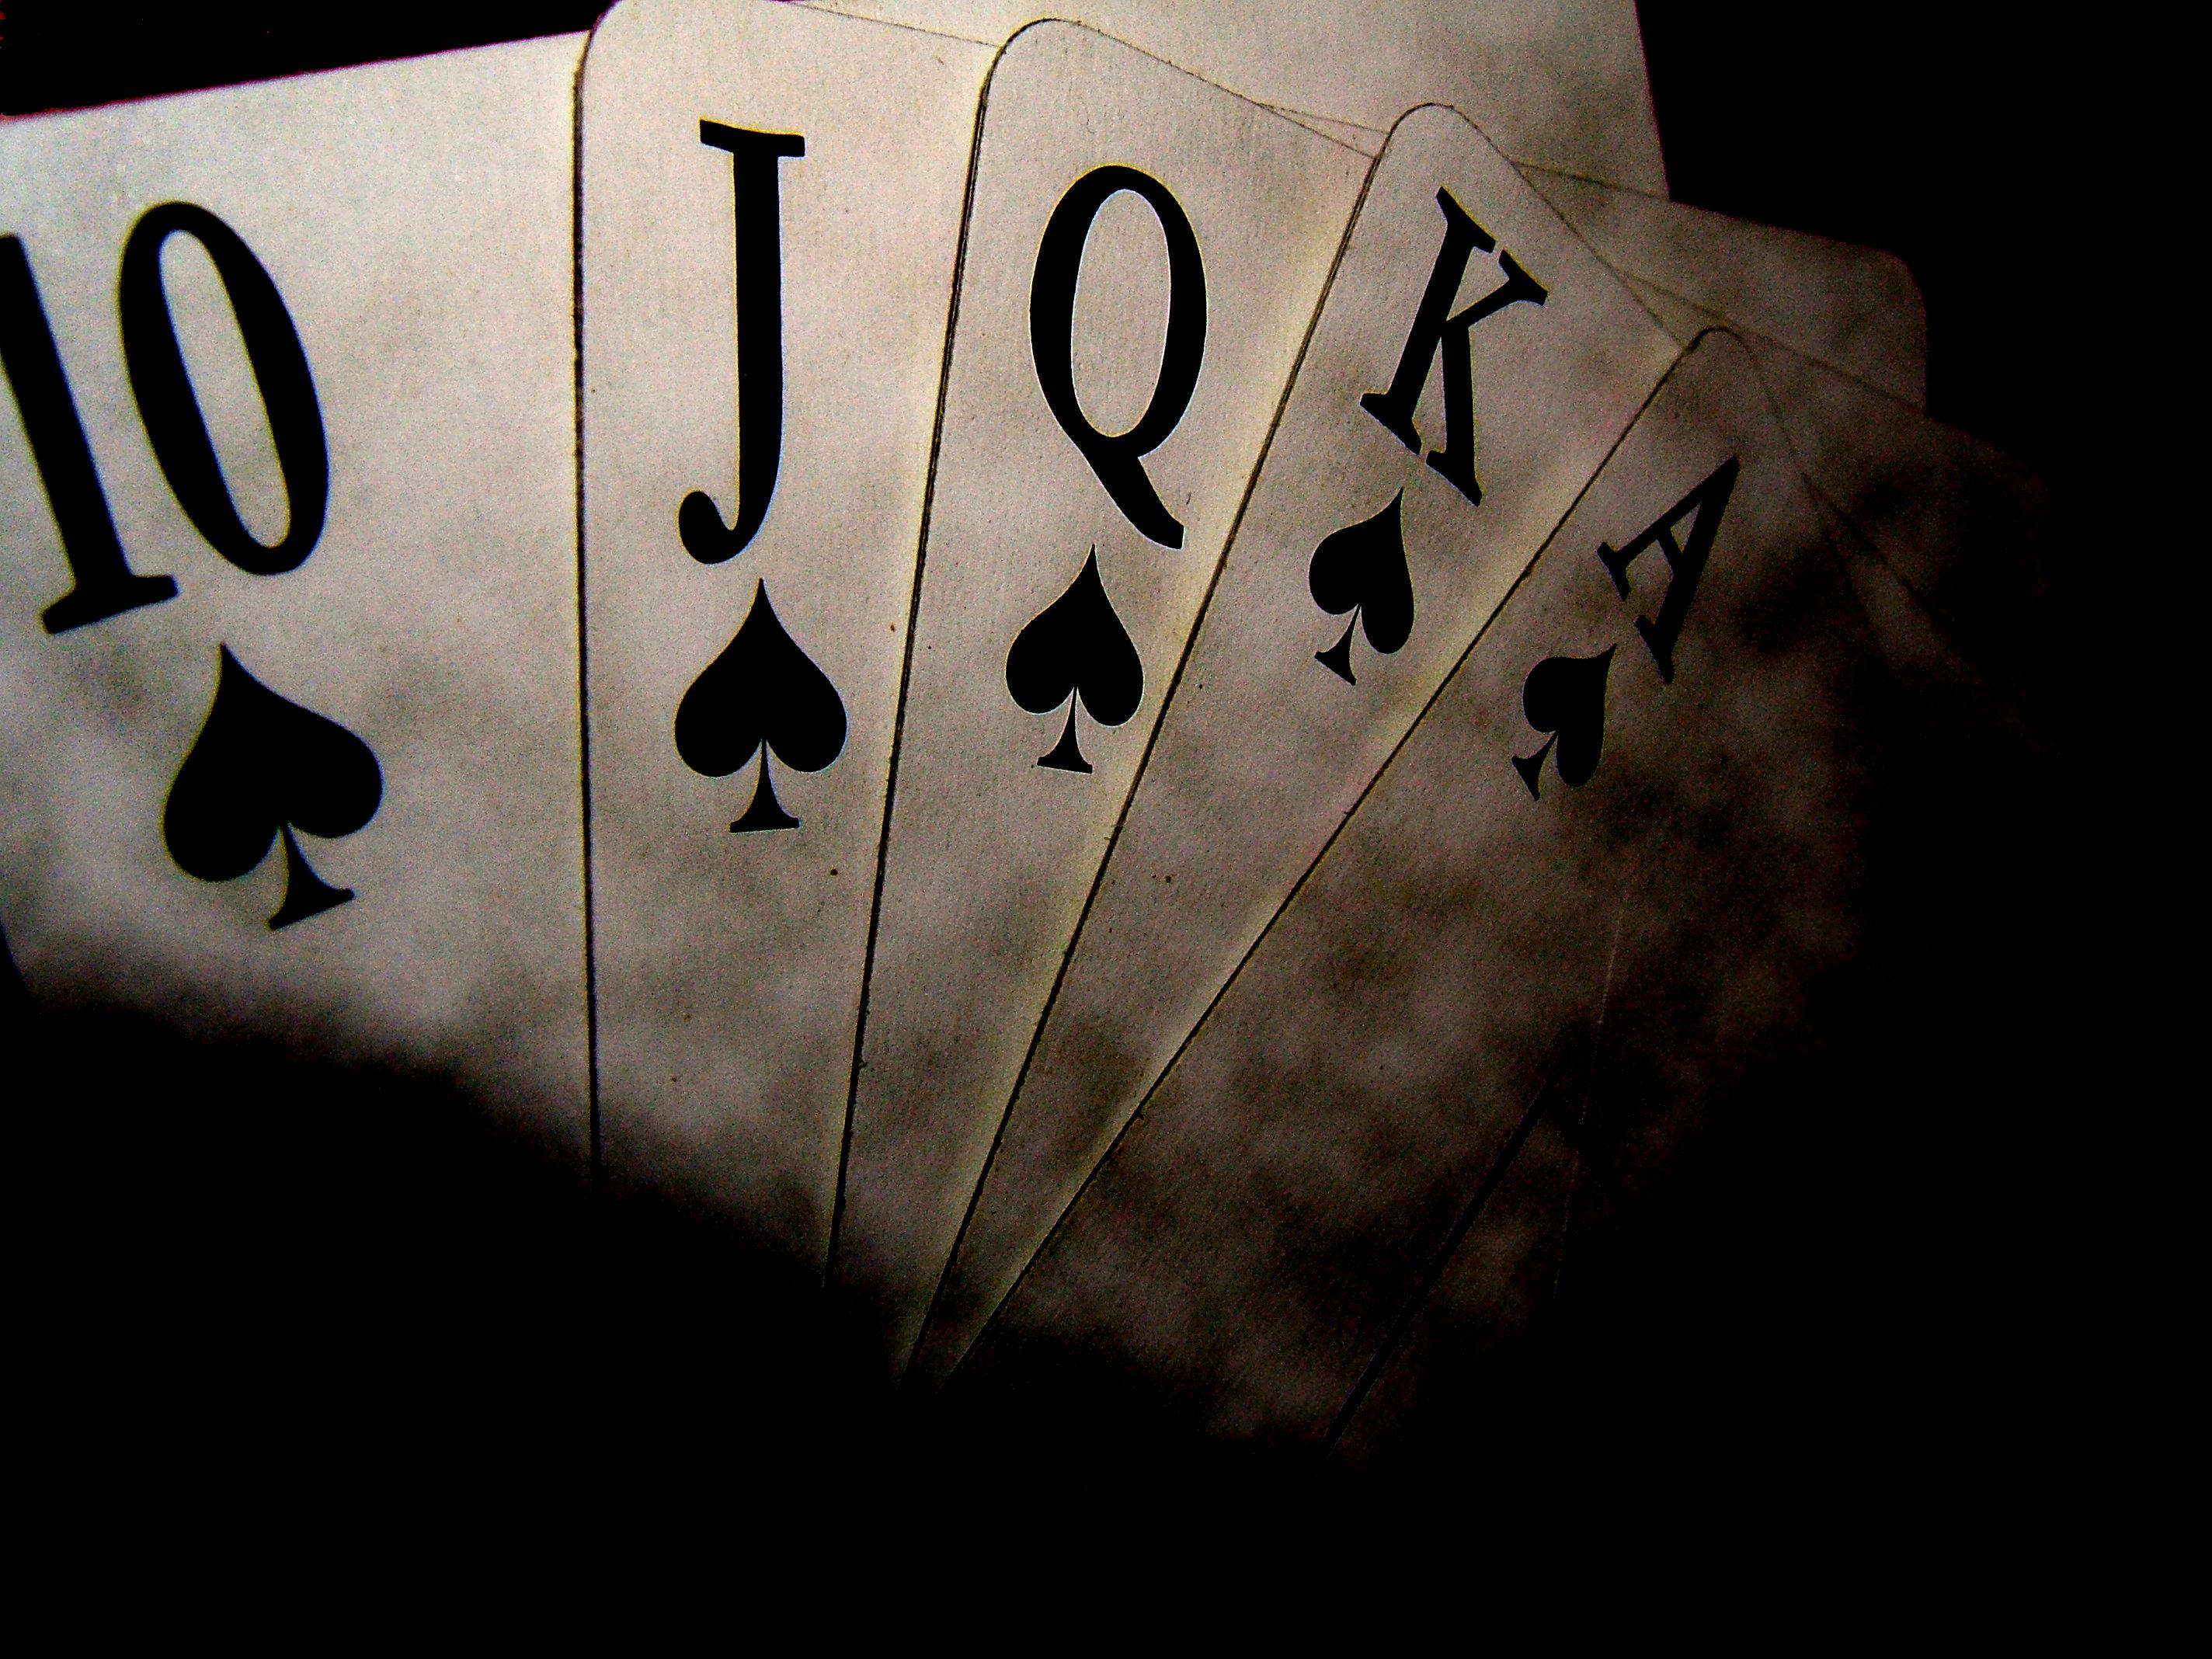 Download Caption: The Joker Card - Mysterious and Enigmatic Wallpaper |  Wallpapers.com